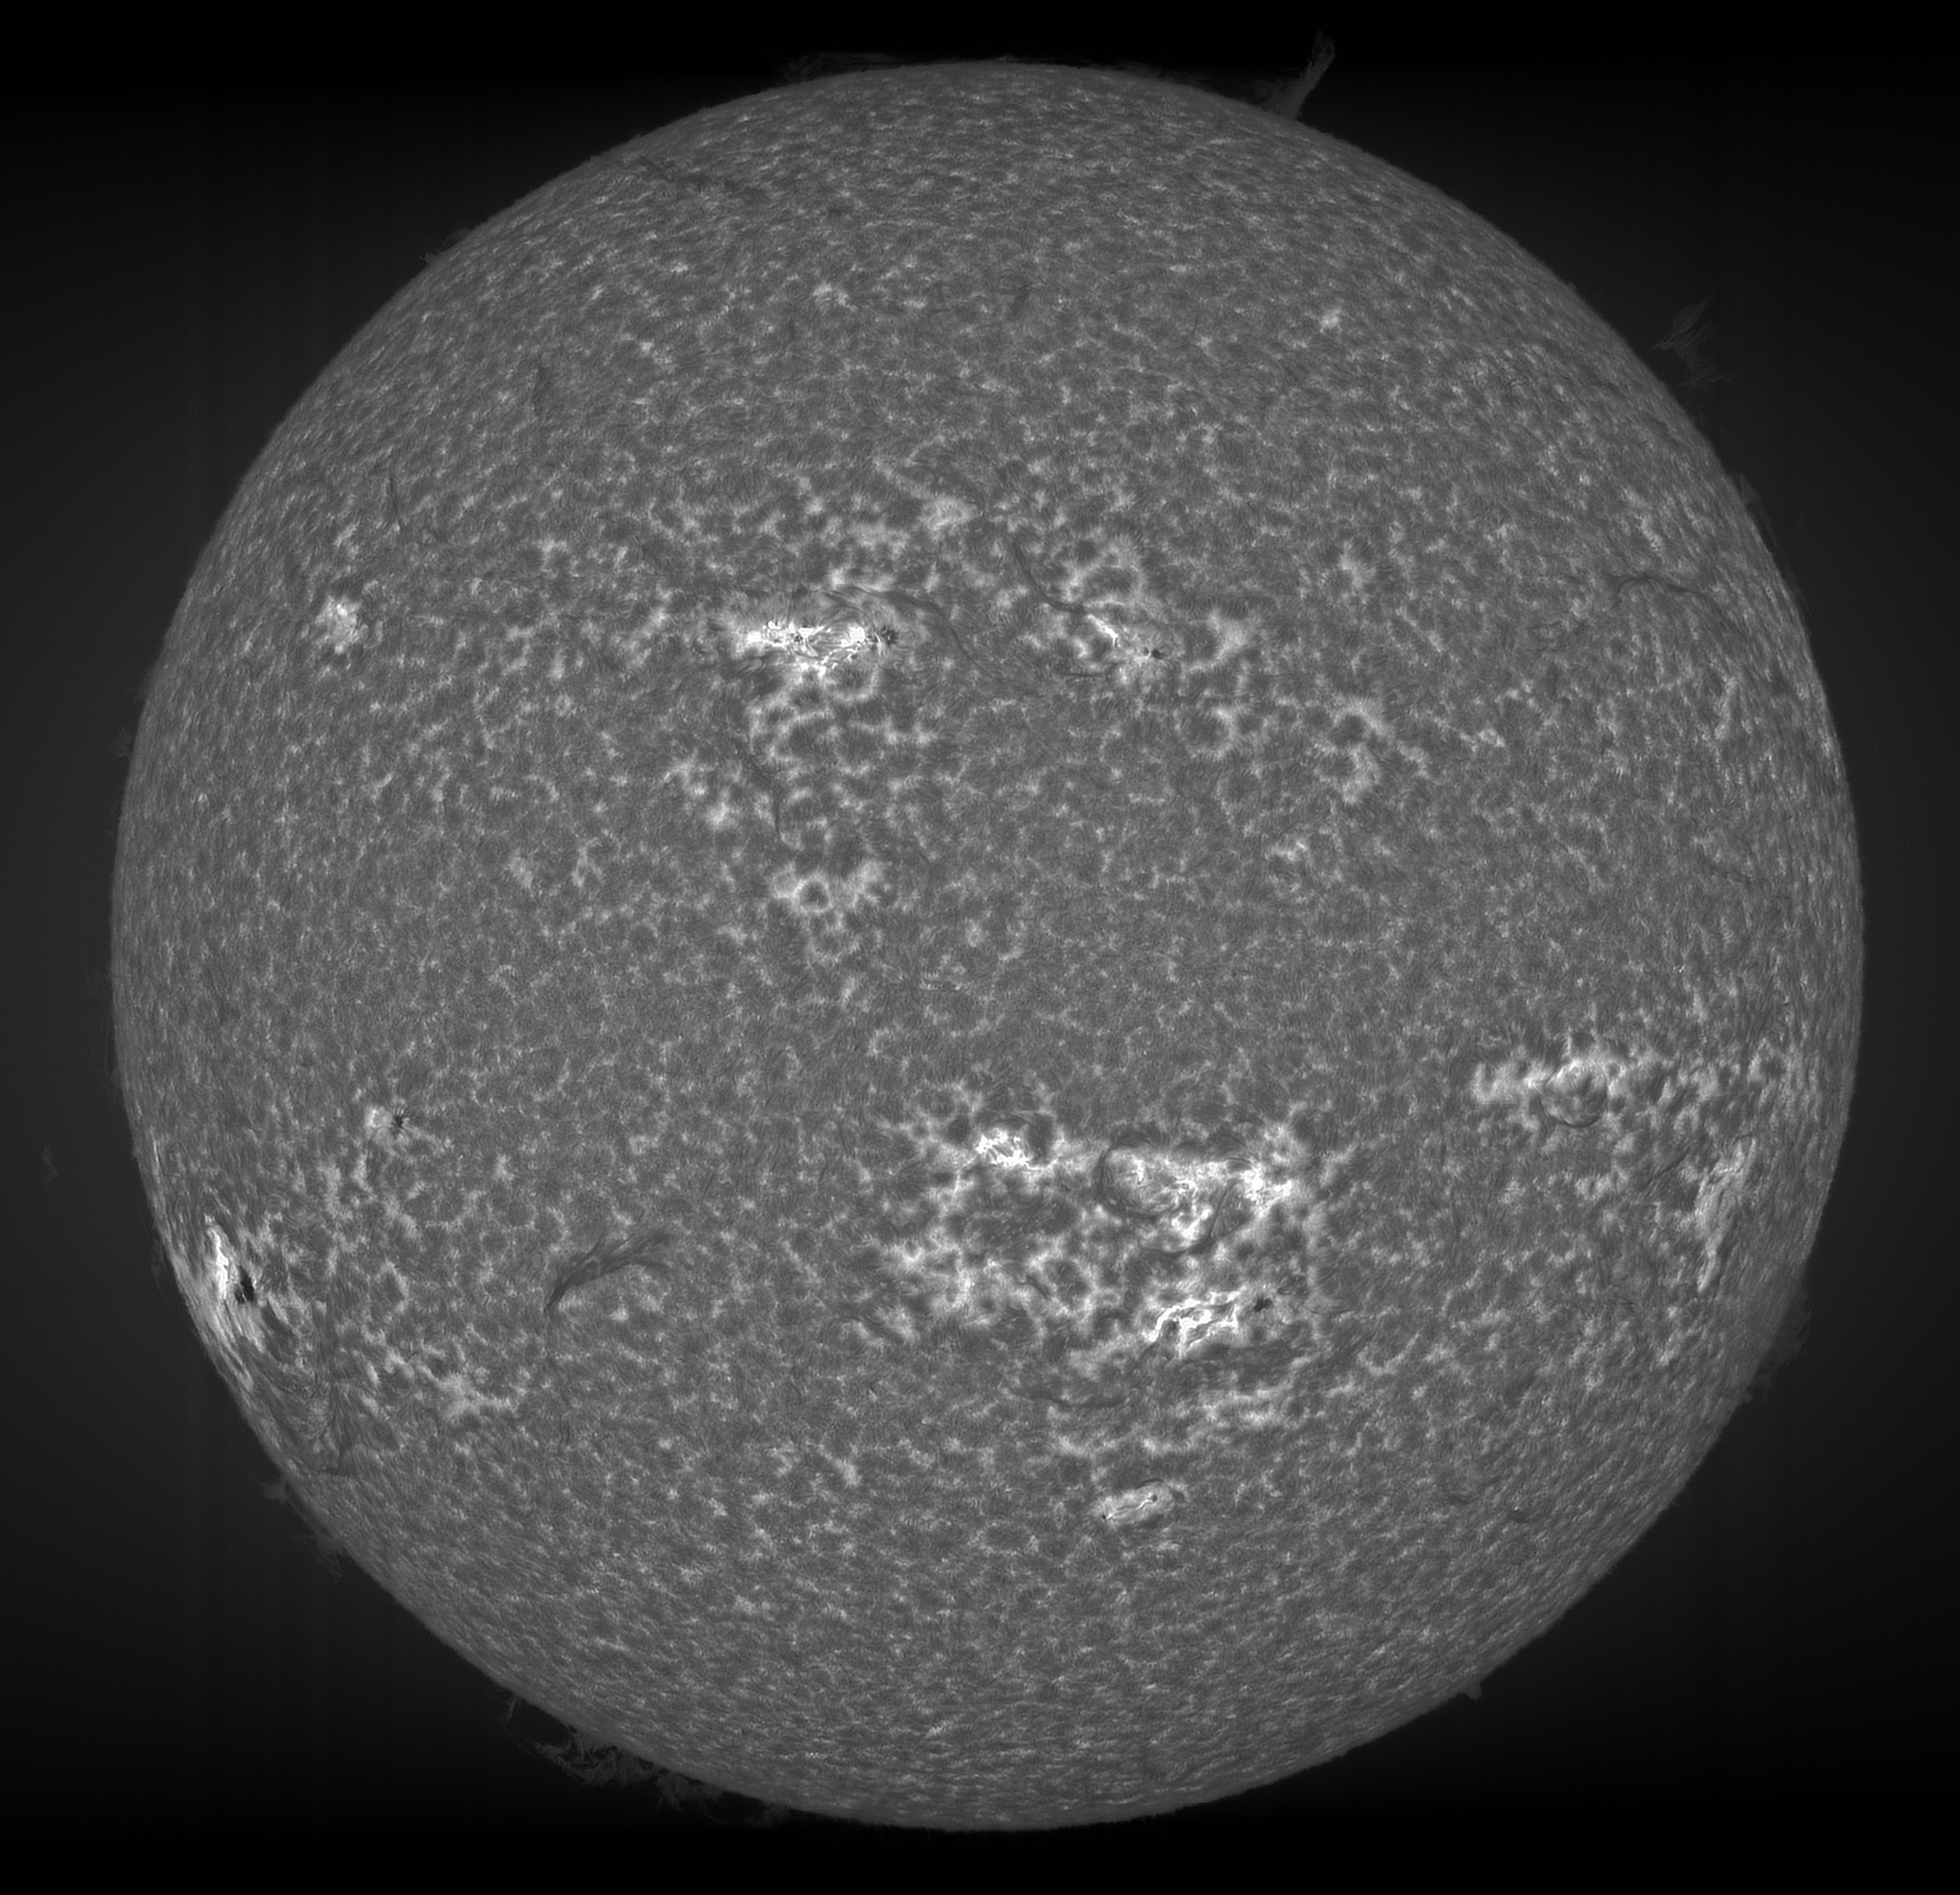 Ca-H SHG. 72mm aperture, f/10. 3.0ms exposure, gain 17%. 318 fps. ROI 3304x120. Stack of 9 frames (from 20 scans). 0846-0852 UTC.